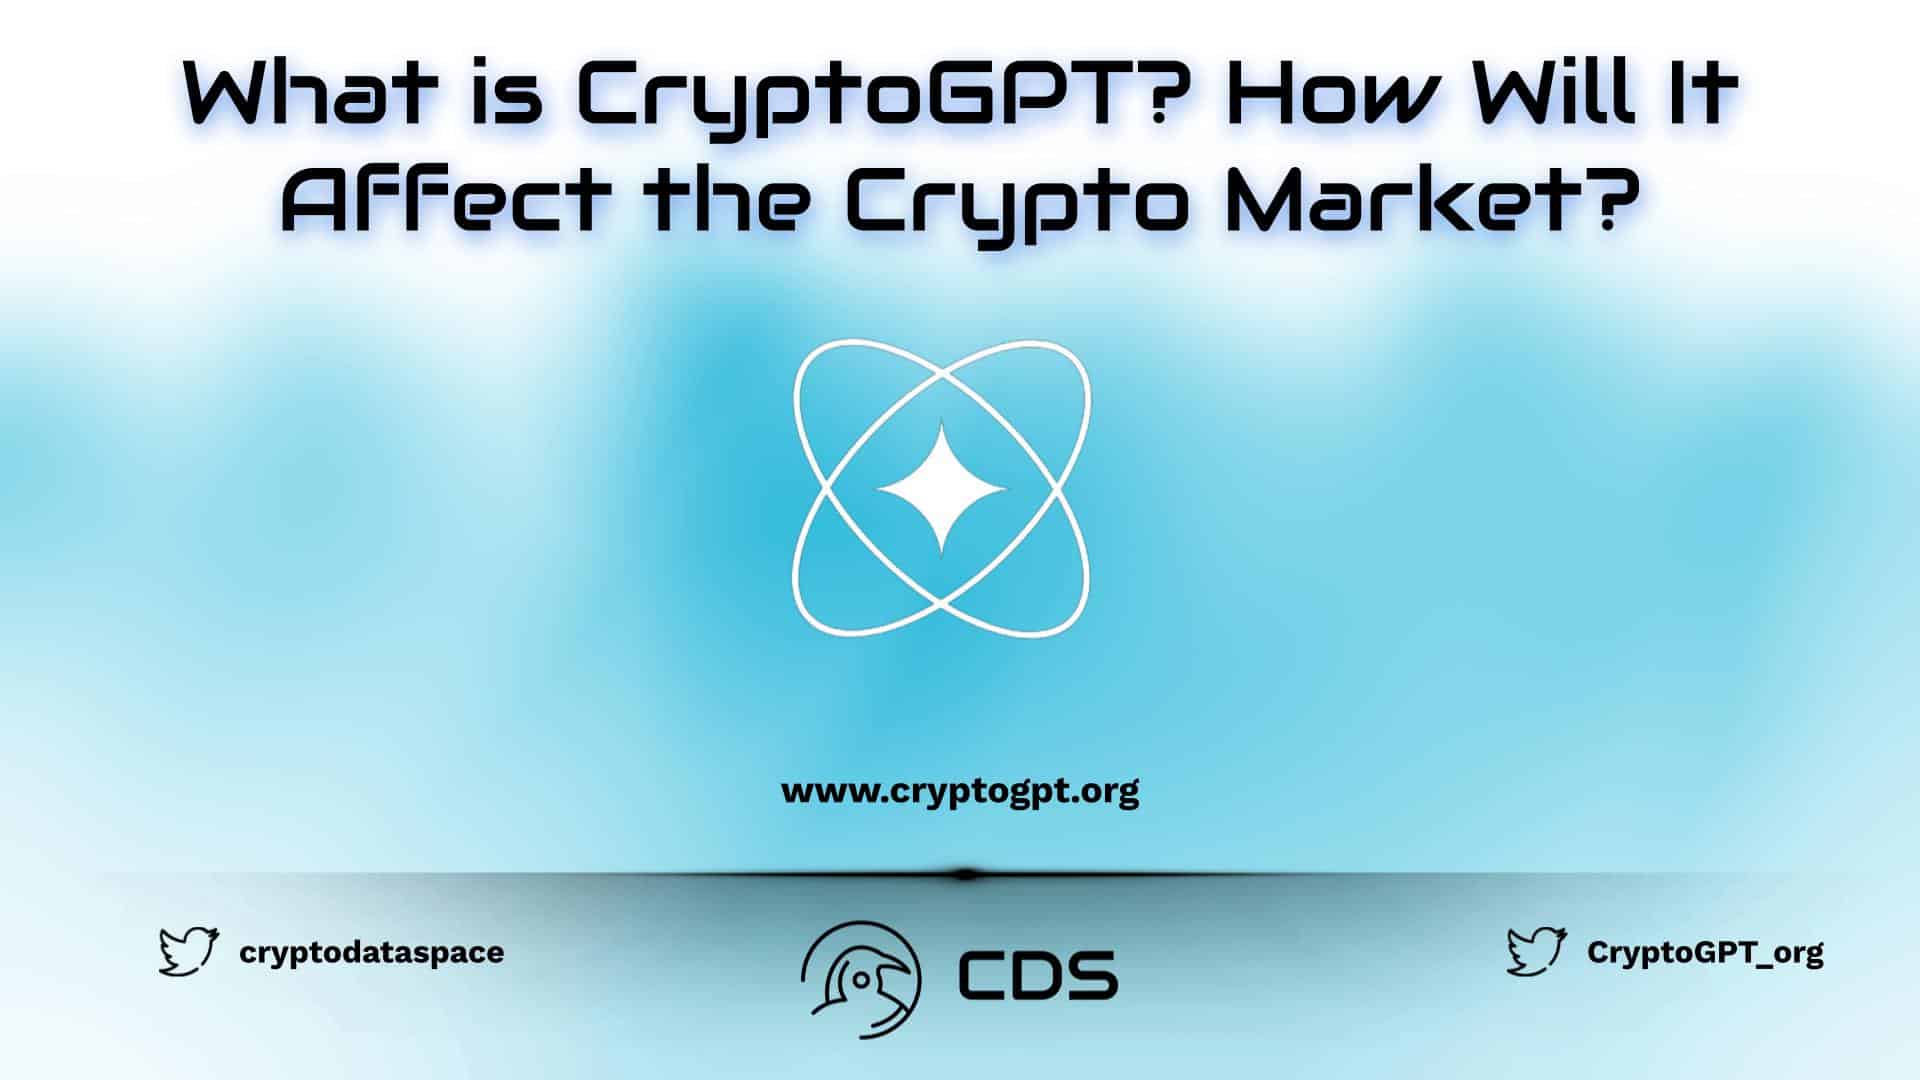 What is CryptoGPT? How Will It Affect the Crypto Market?